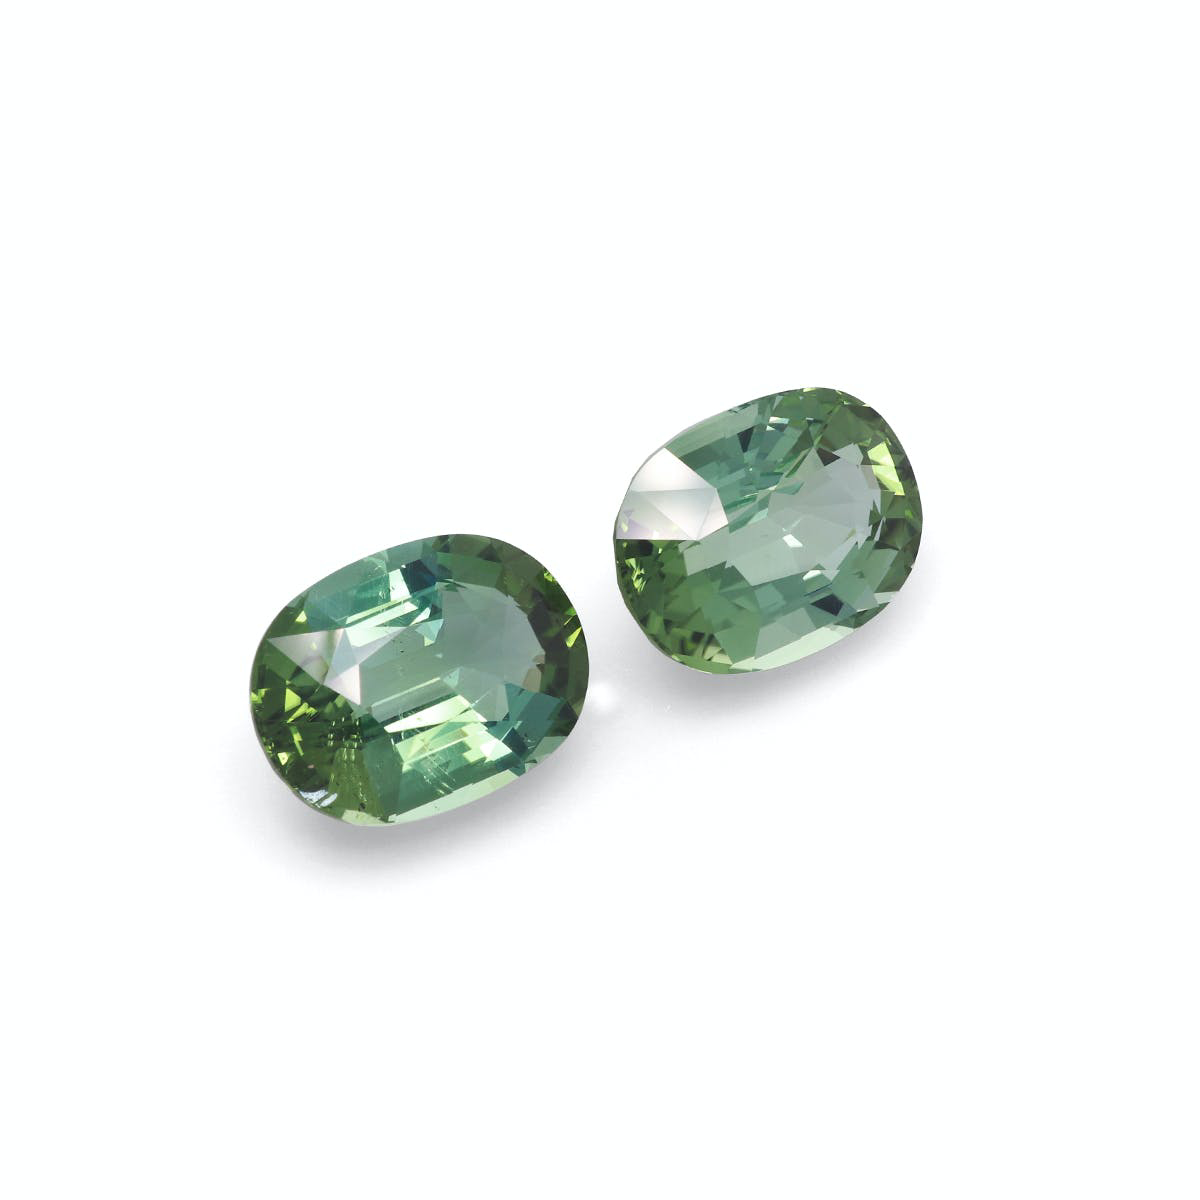 Picture of Cotton Green Tourmaline 34.59ct - Pair (TG0506)